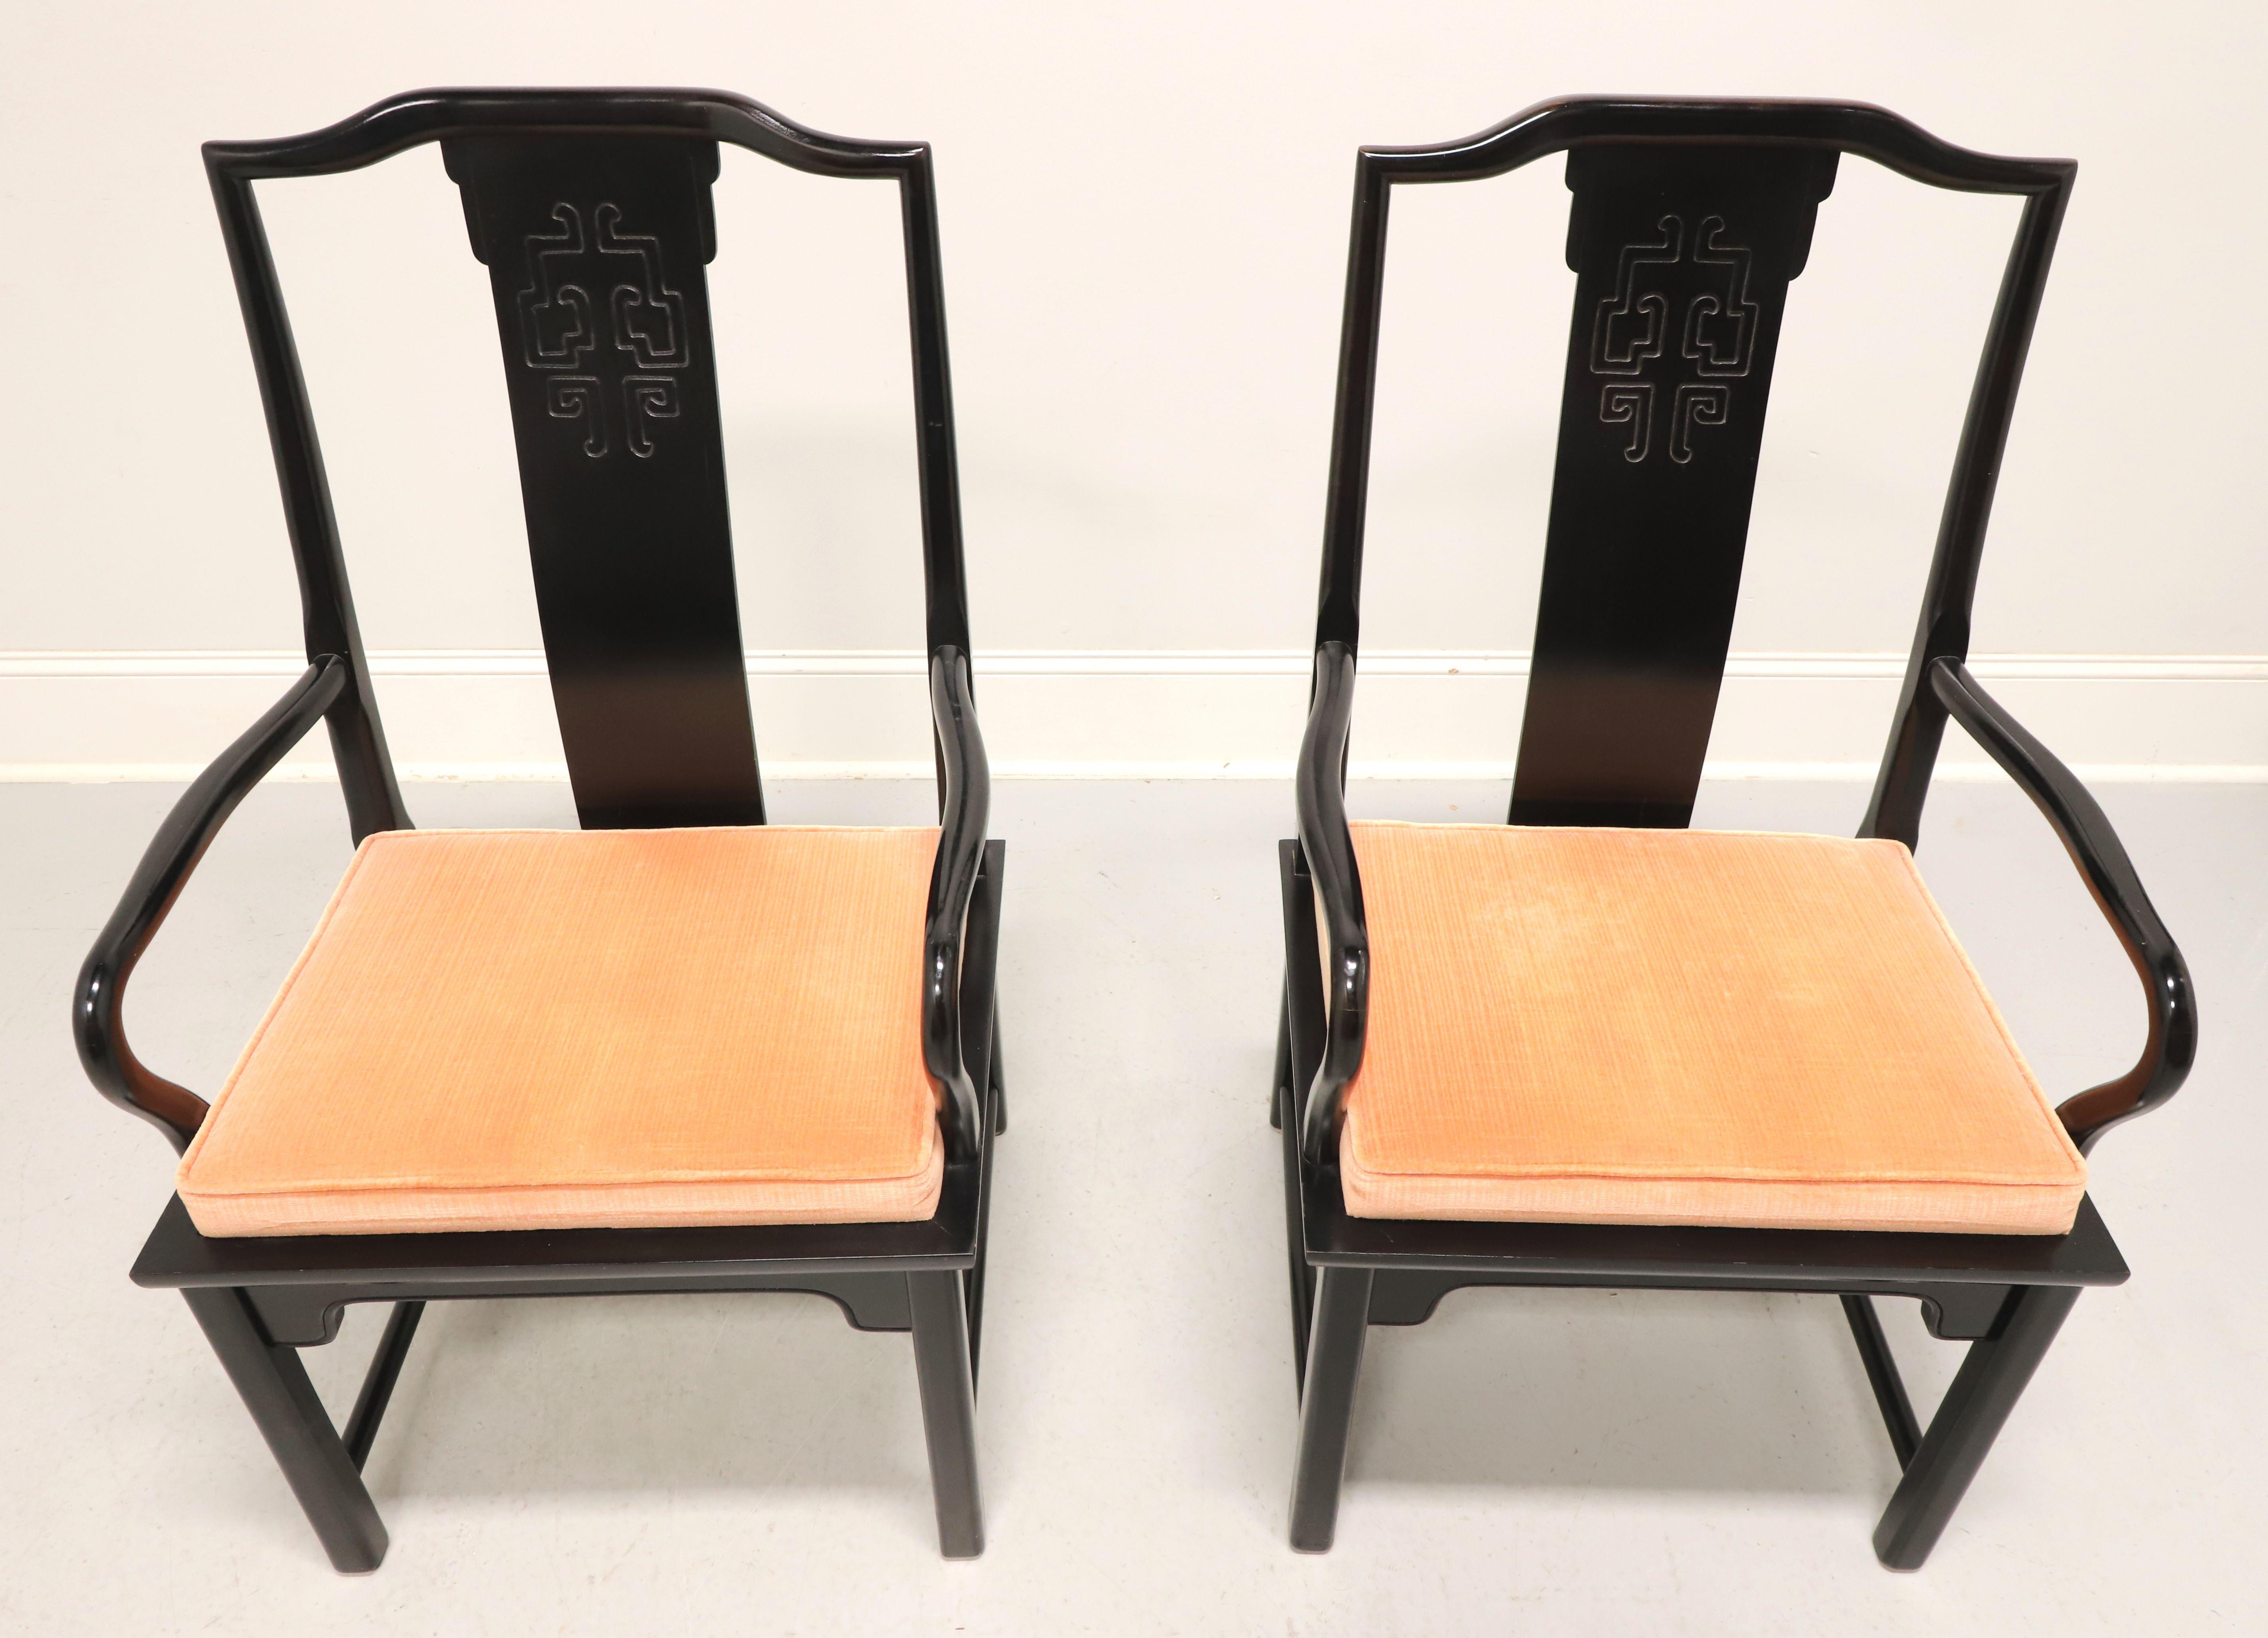 A pair of Asian chinoiserie style dining armchairs by high-quality furniture maker Century. From their 